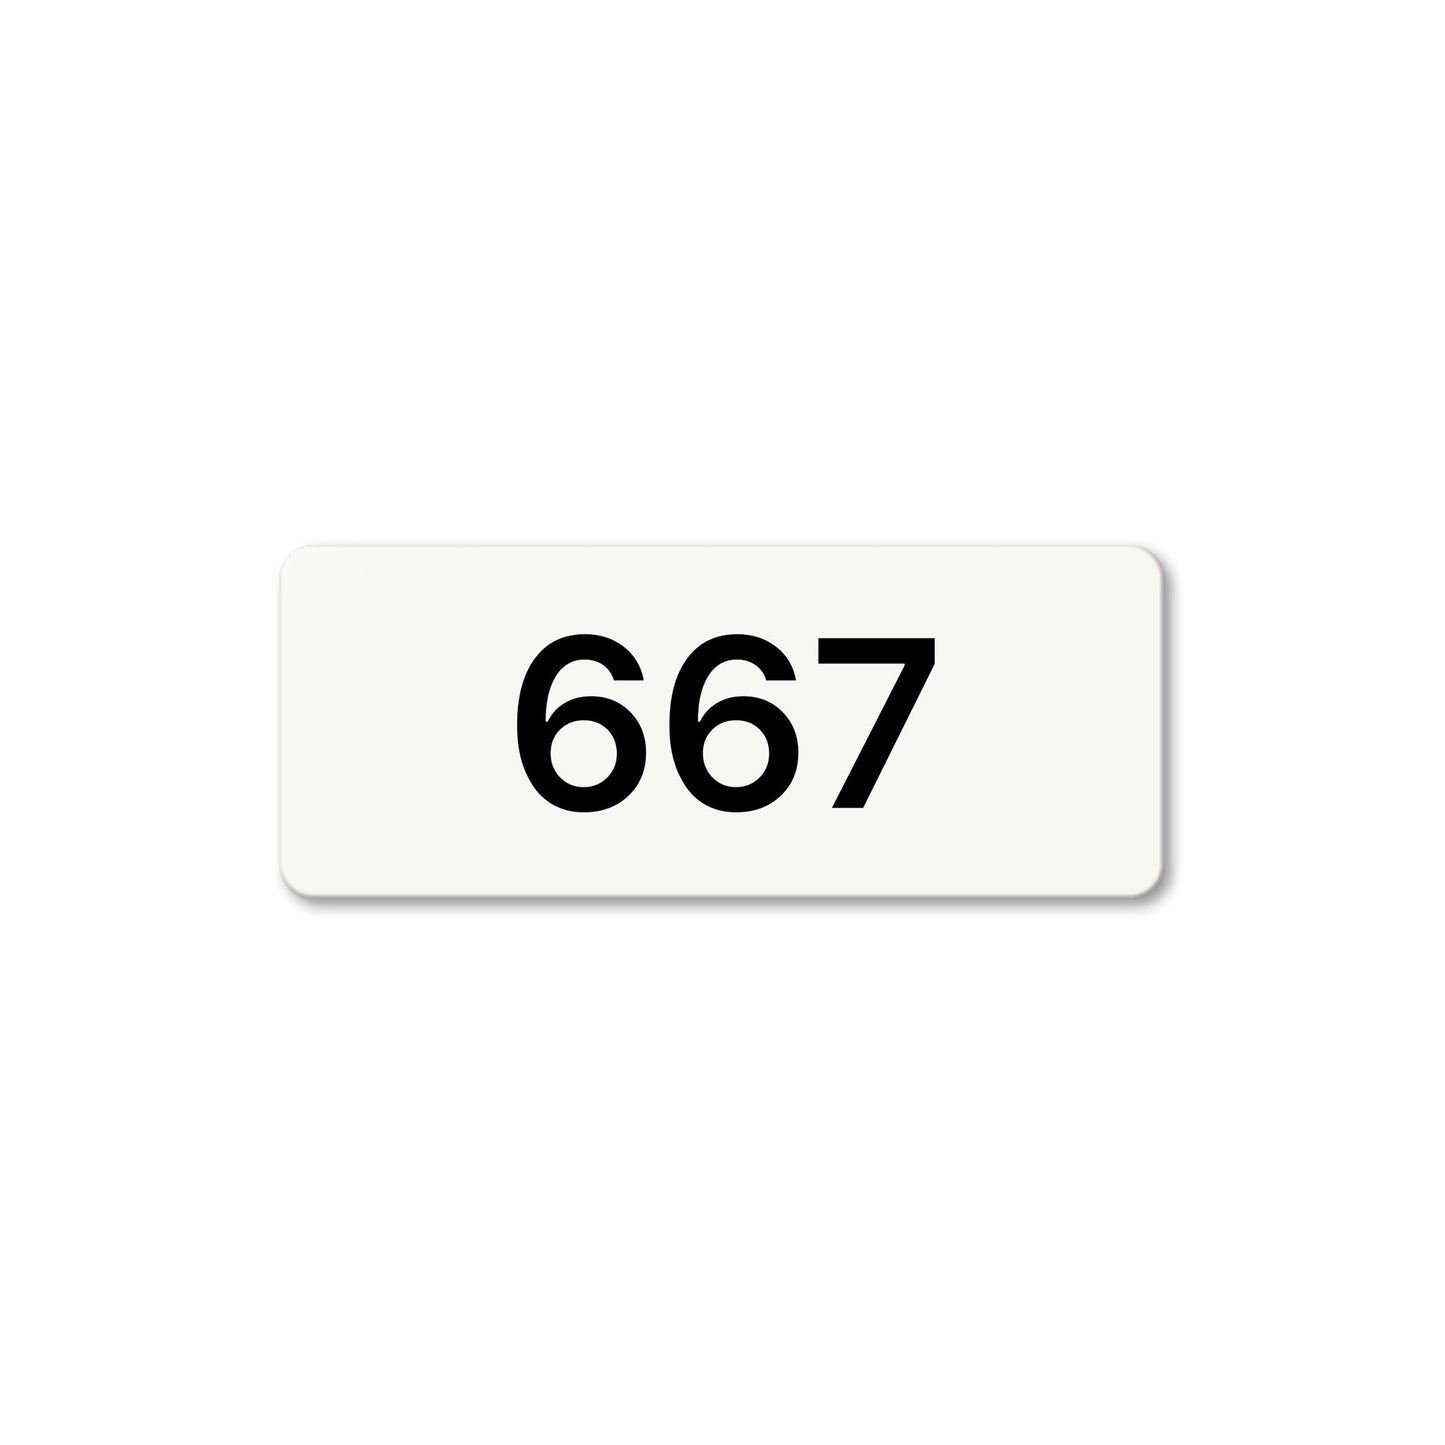 Numeral 667